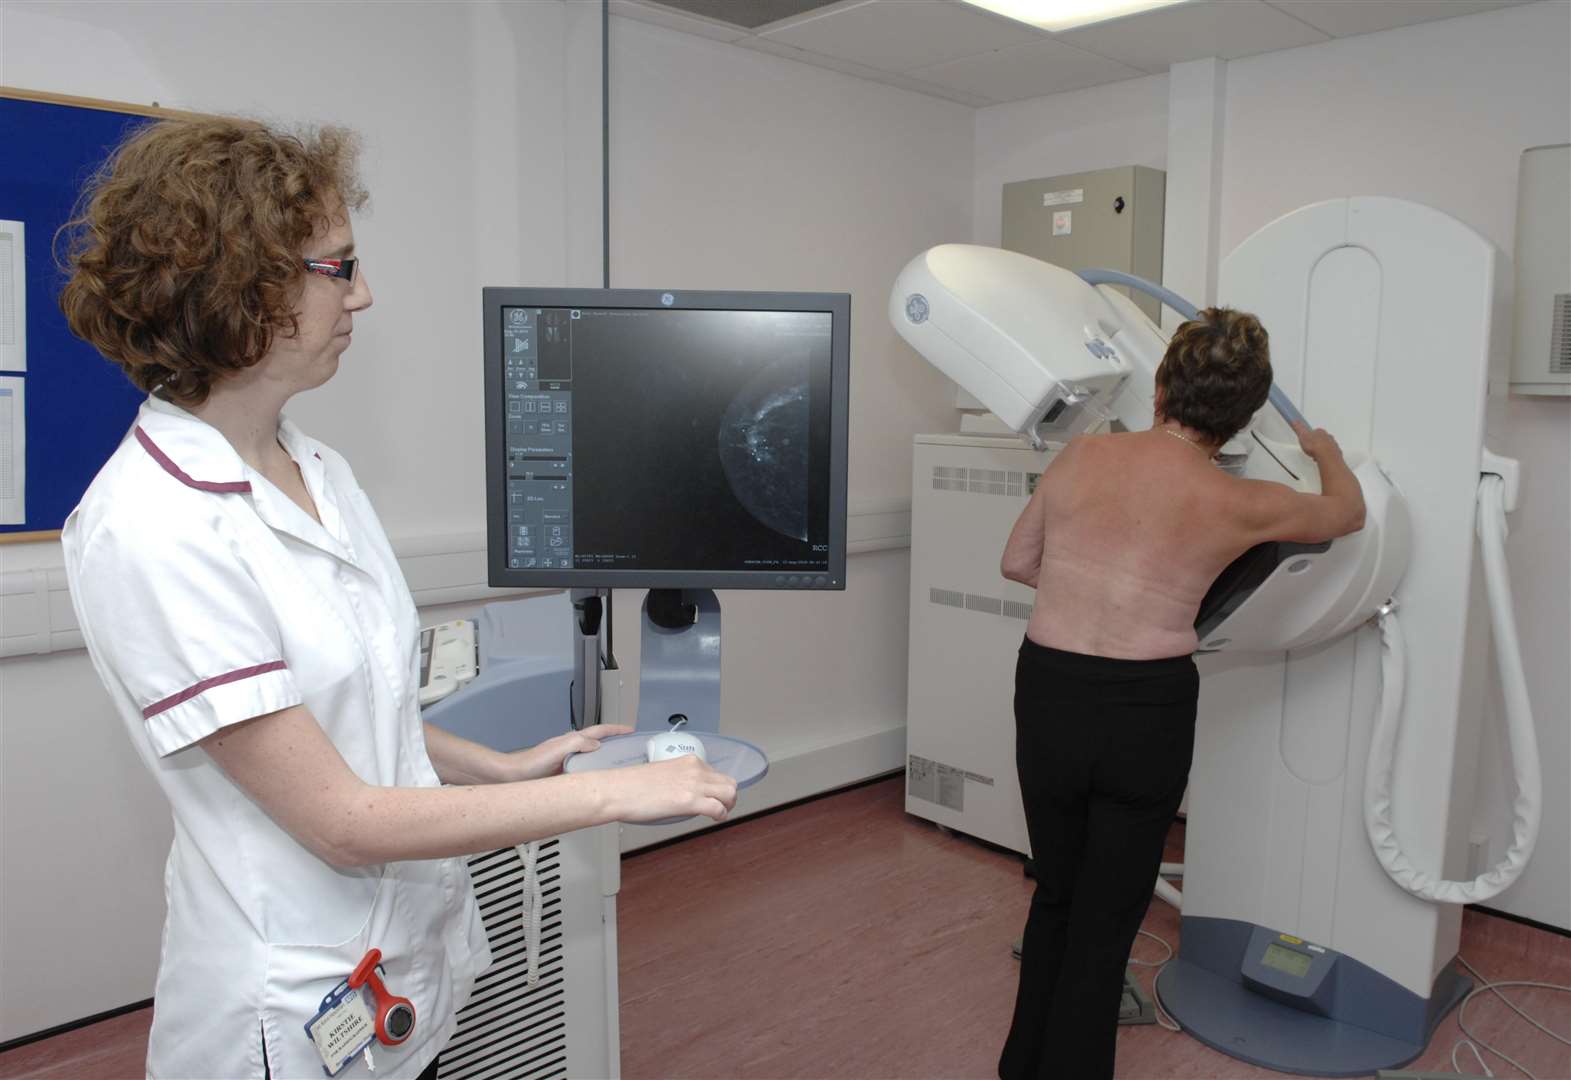 60000 Women In Kent And Medway Missed Breast Cancer Screenings